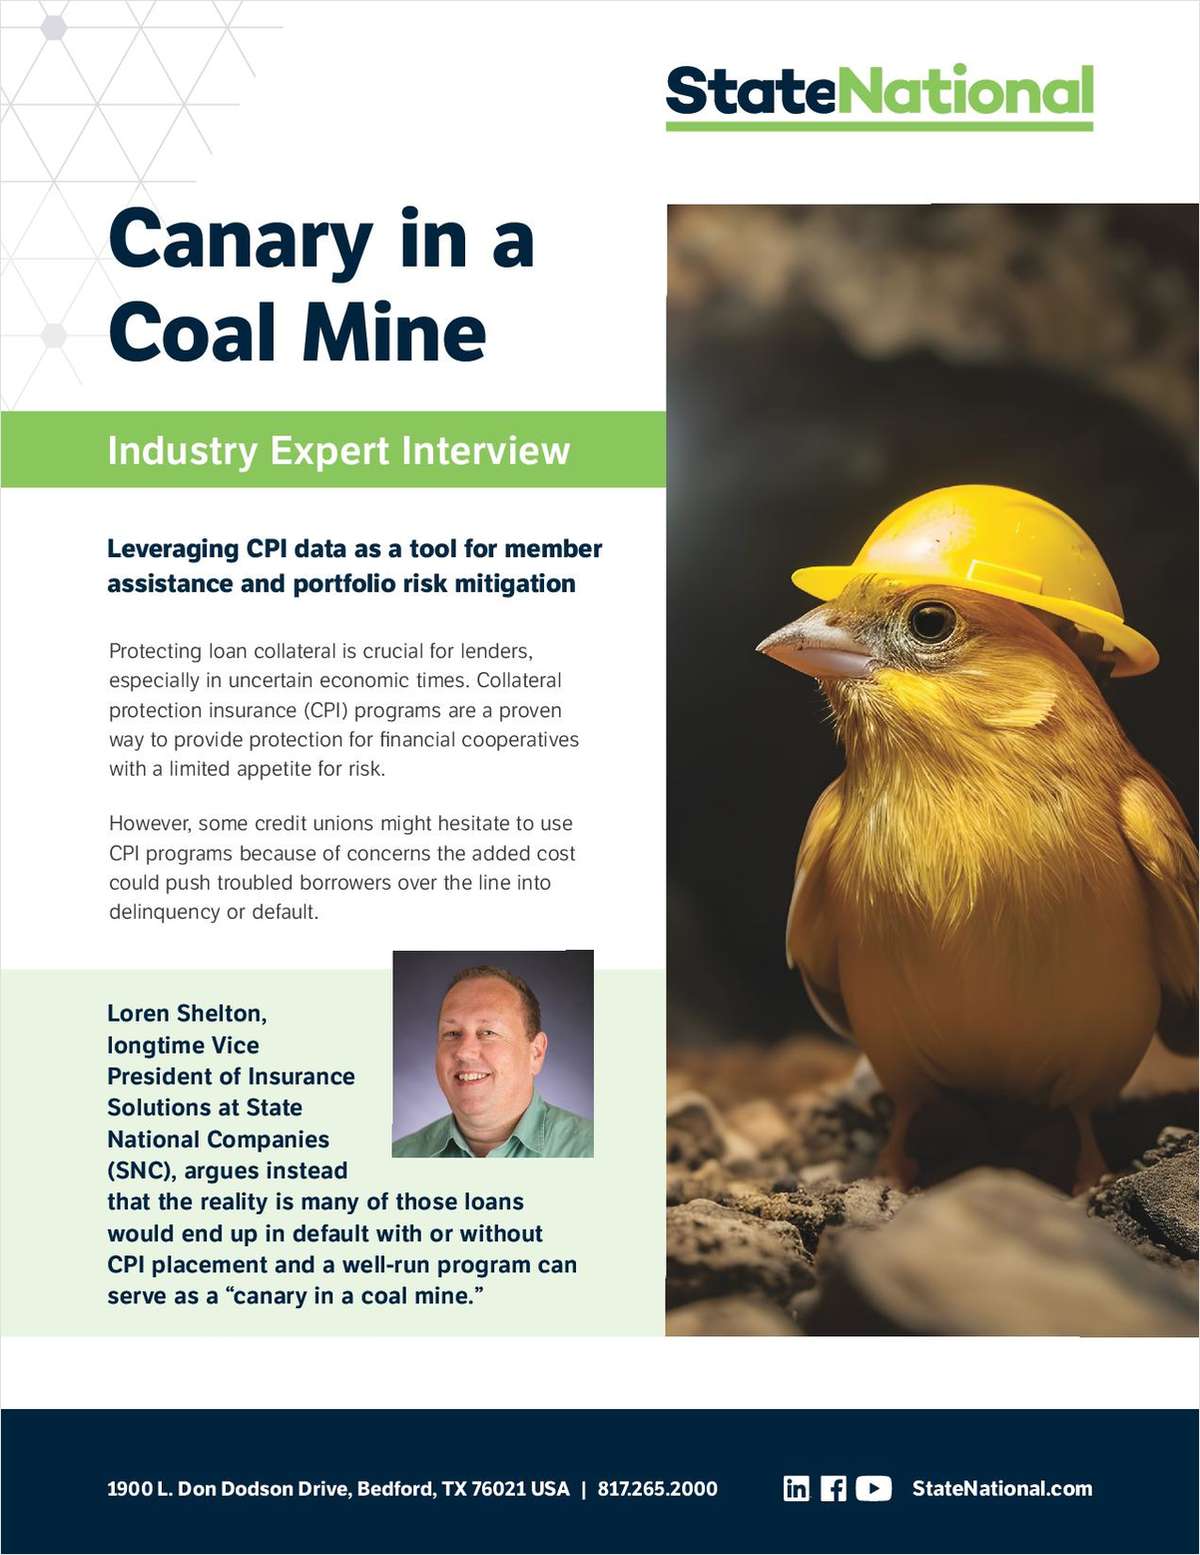 Canary in a Coal Mine: Industry Expert Interview link